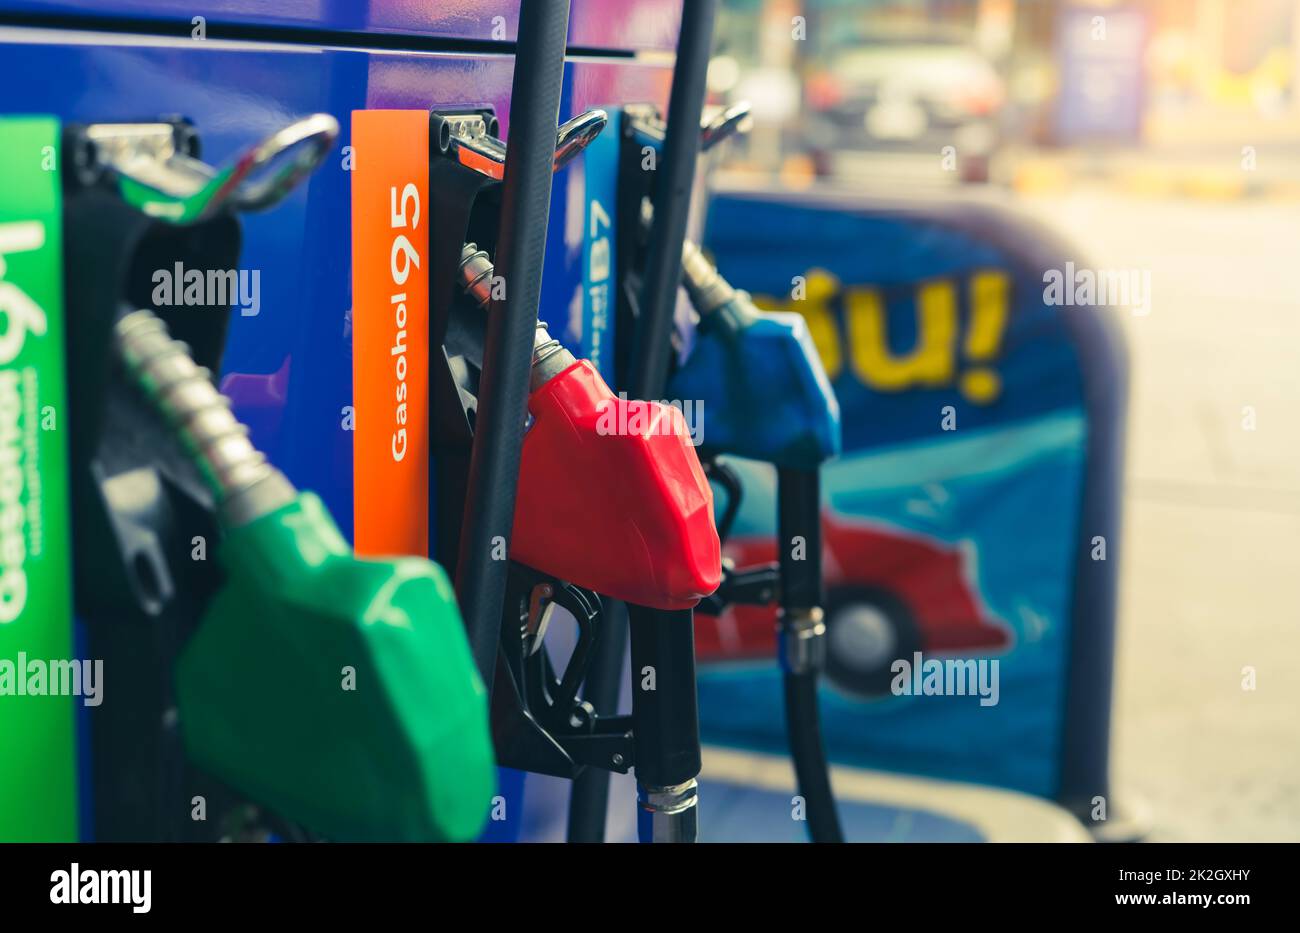 Petrol pump filling fuel nozzle in gas station. Fuel dispenser. Refuel fill up with petrol gasoline. Gas pump handle. Red petrol fuel nozzle. Petroleum oil industry. Oil crisis. Petrol price crisis. Stock Photo